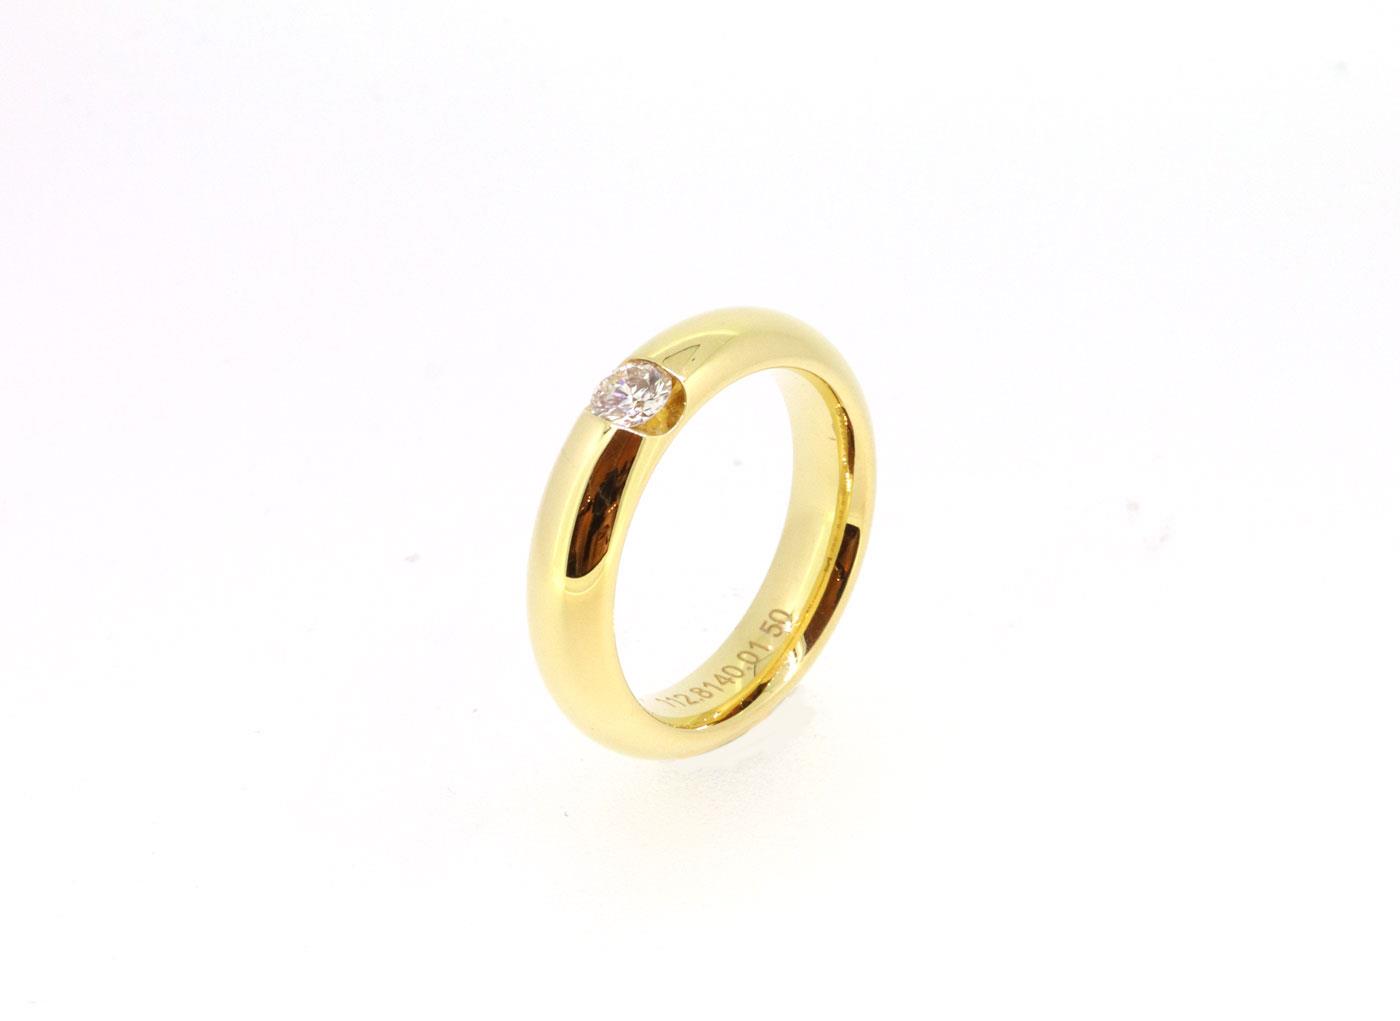 Ring 0,22ct Solitaire 18ct Gelbgold - Meister - 112.8140.01